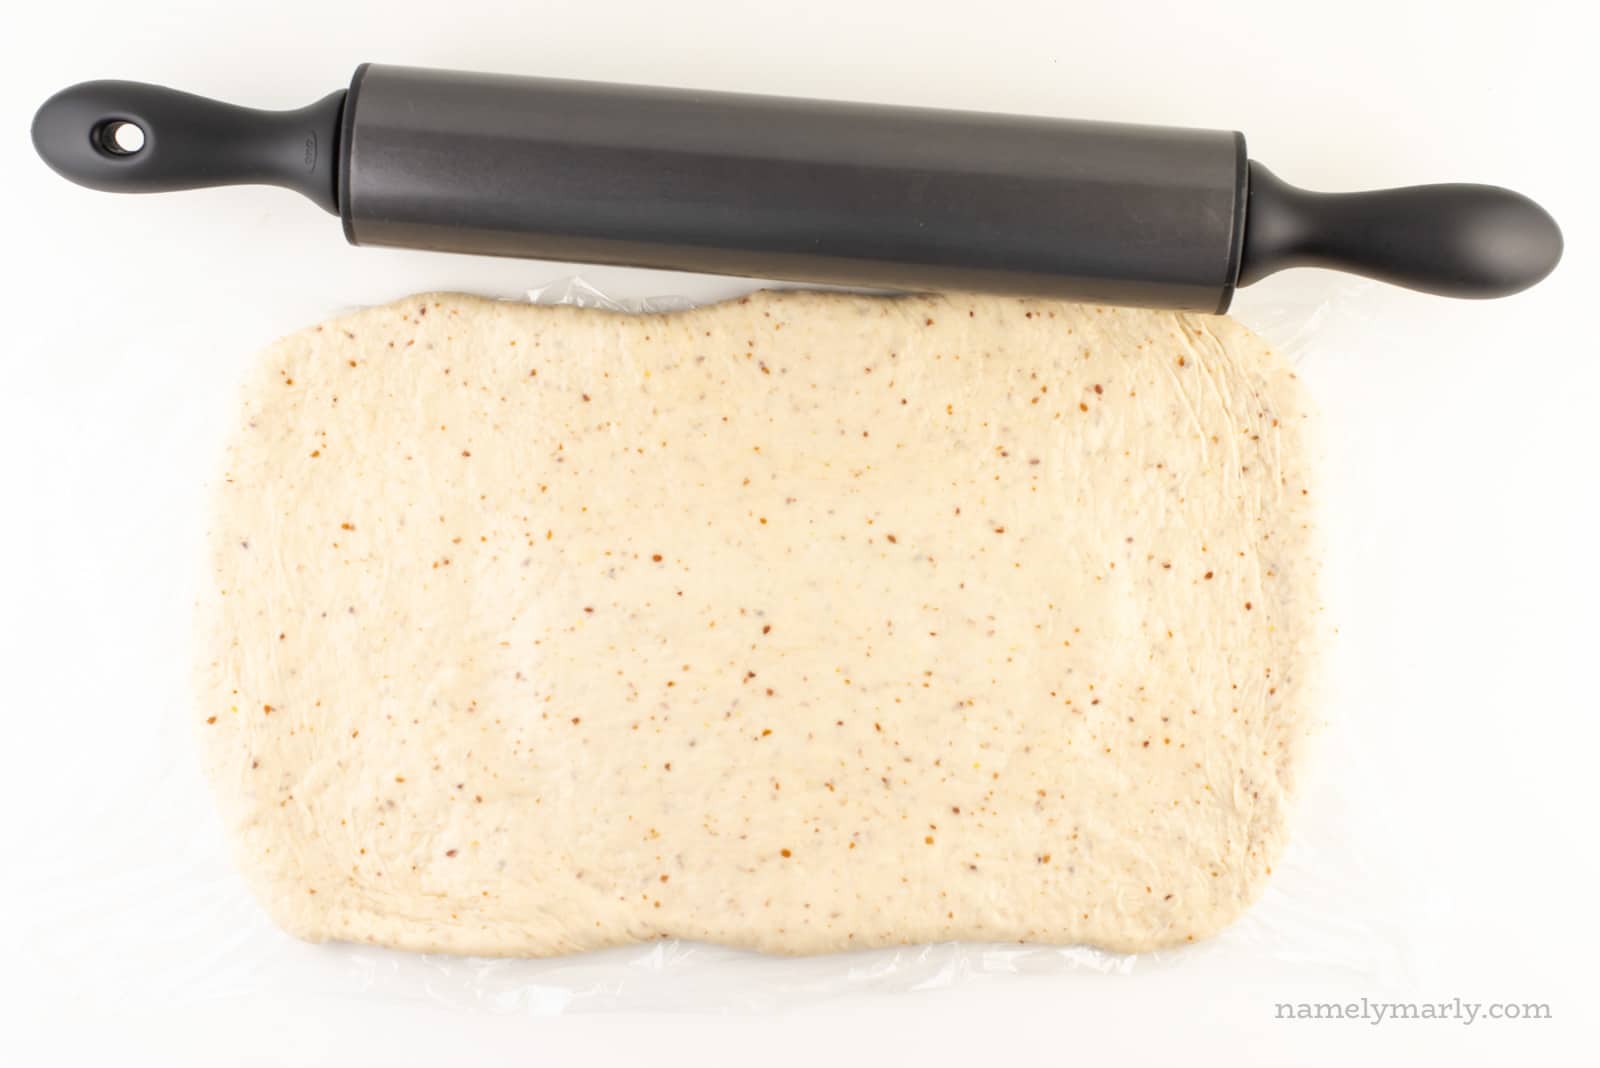 Dough has been rolled out into a long rectangle and sits next to a rolling pin.